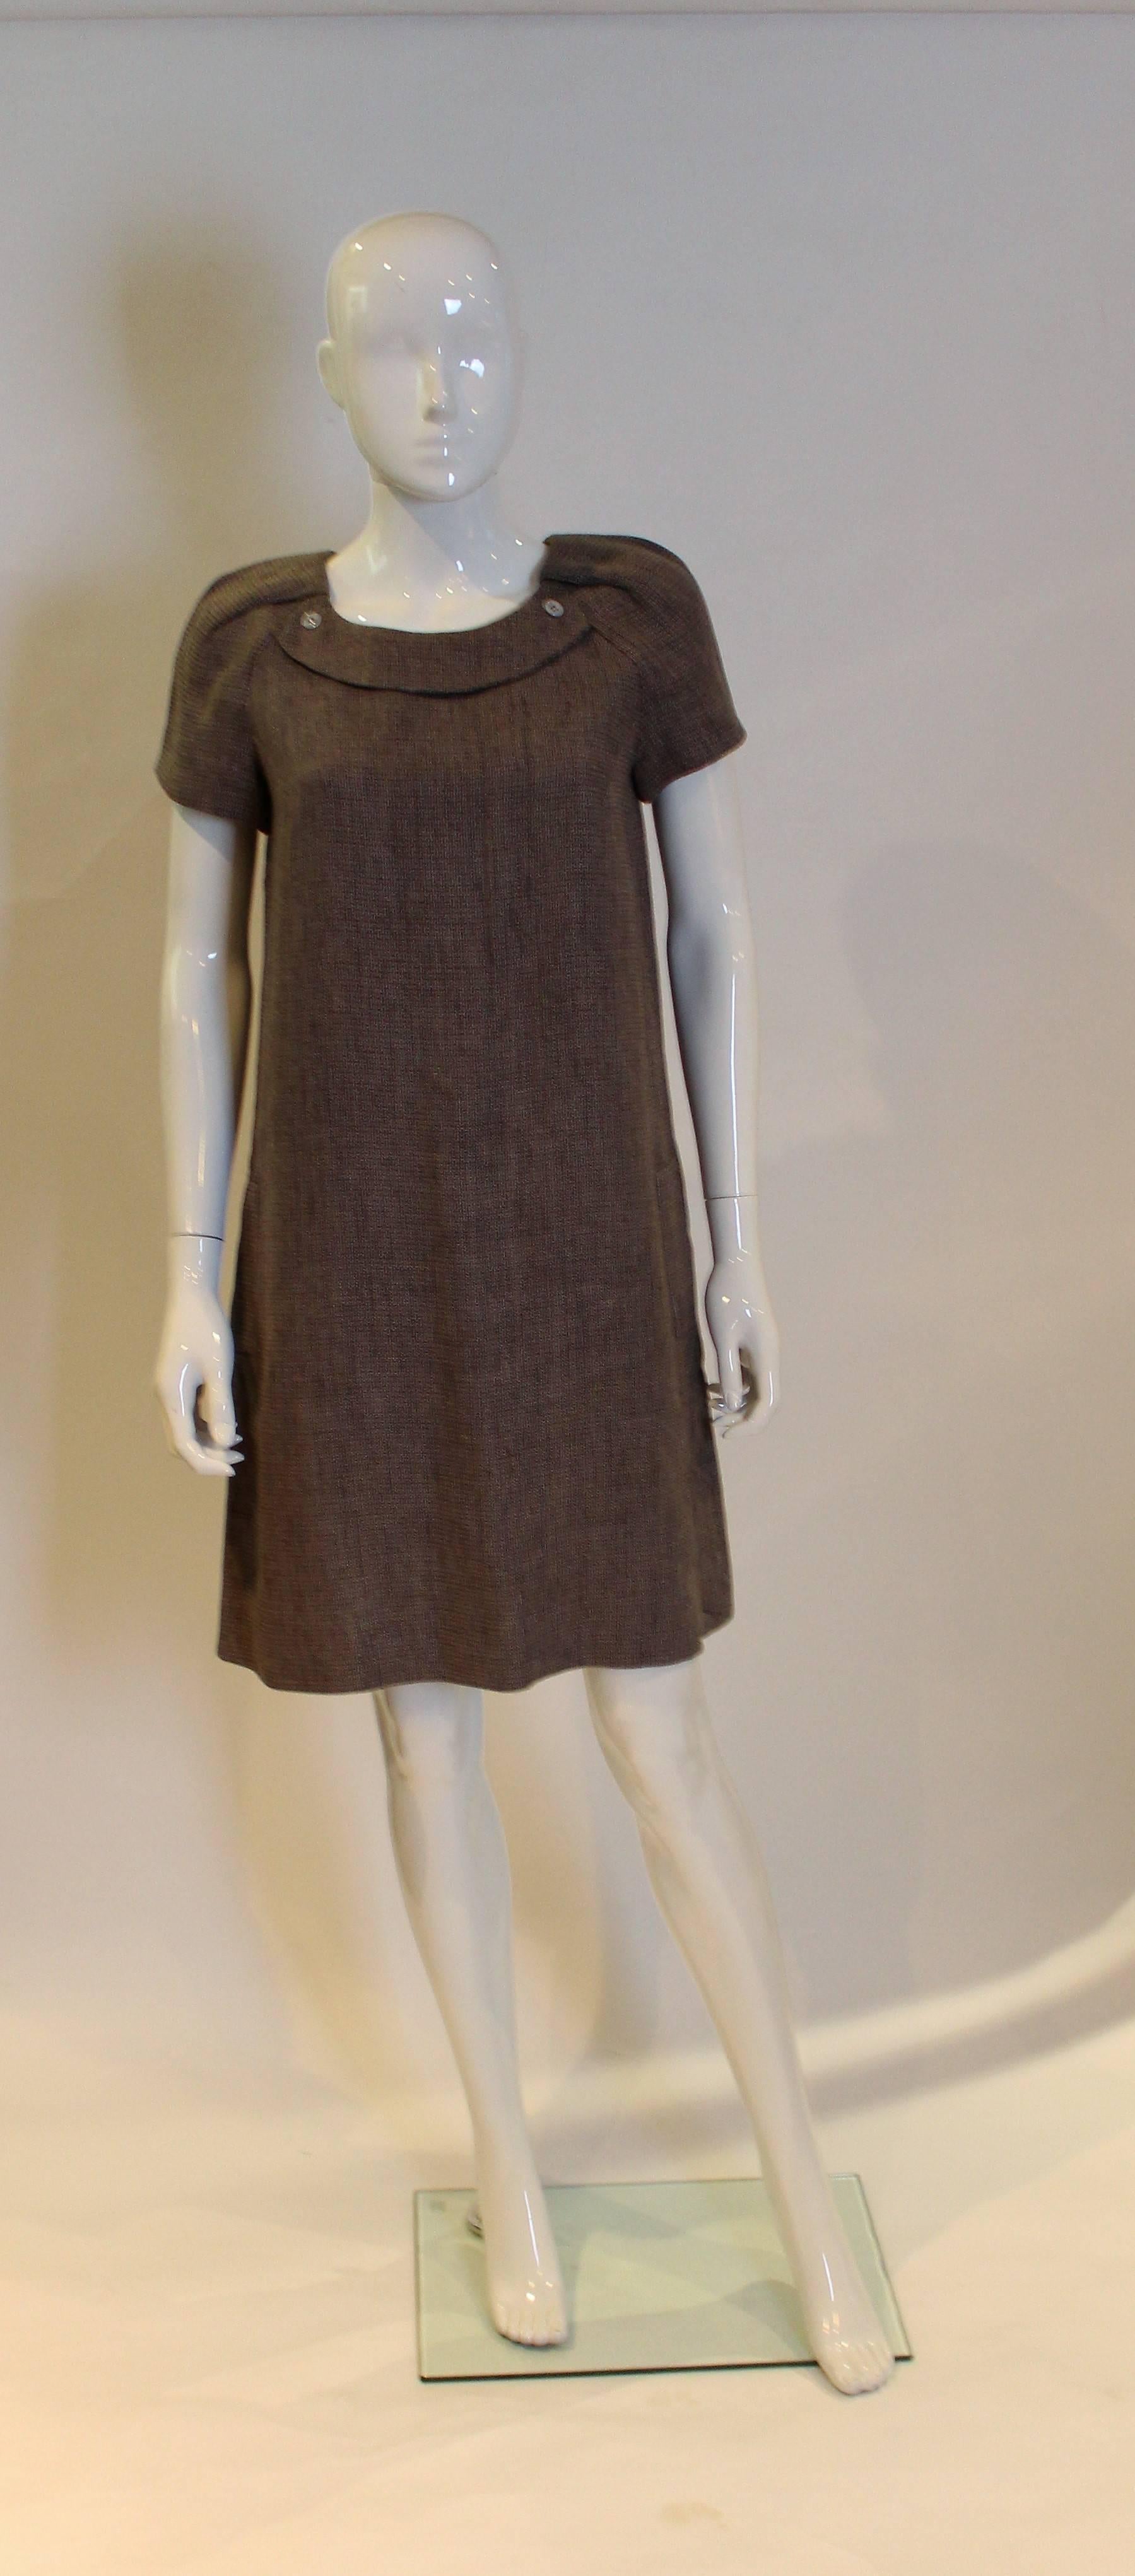 A great little black dress for Spring/Summer by Chloe. In a cotton /linen mix and fully lined, this dress has a round neck, short sleeves and two pockets. It opens with a beautifuly hidded zip at the back.